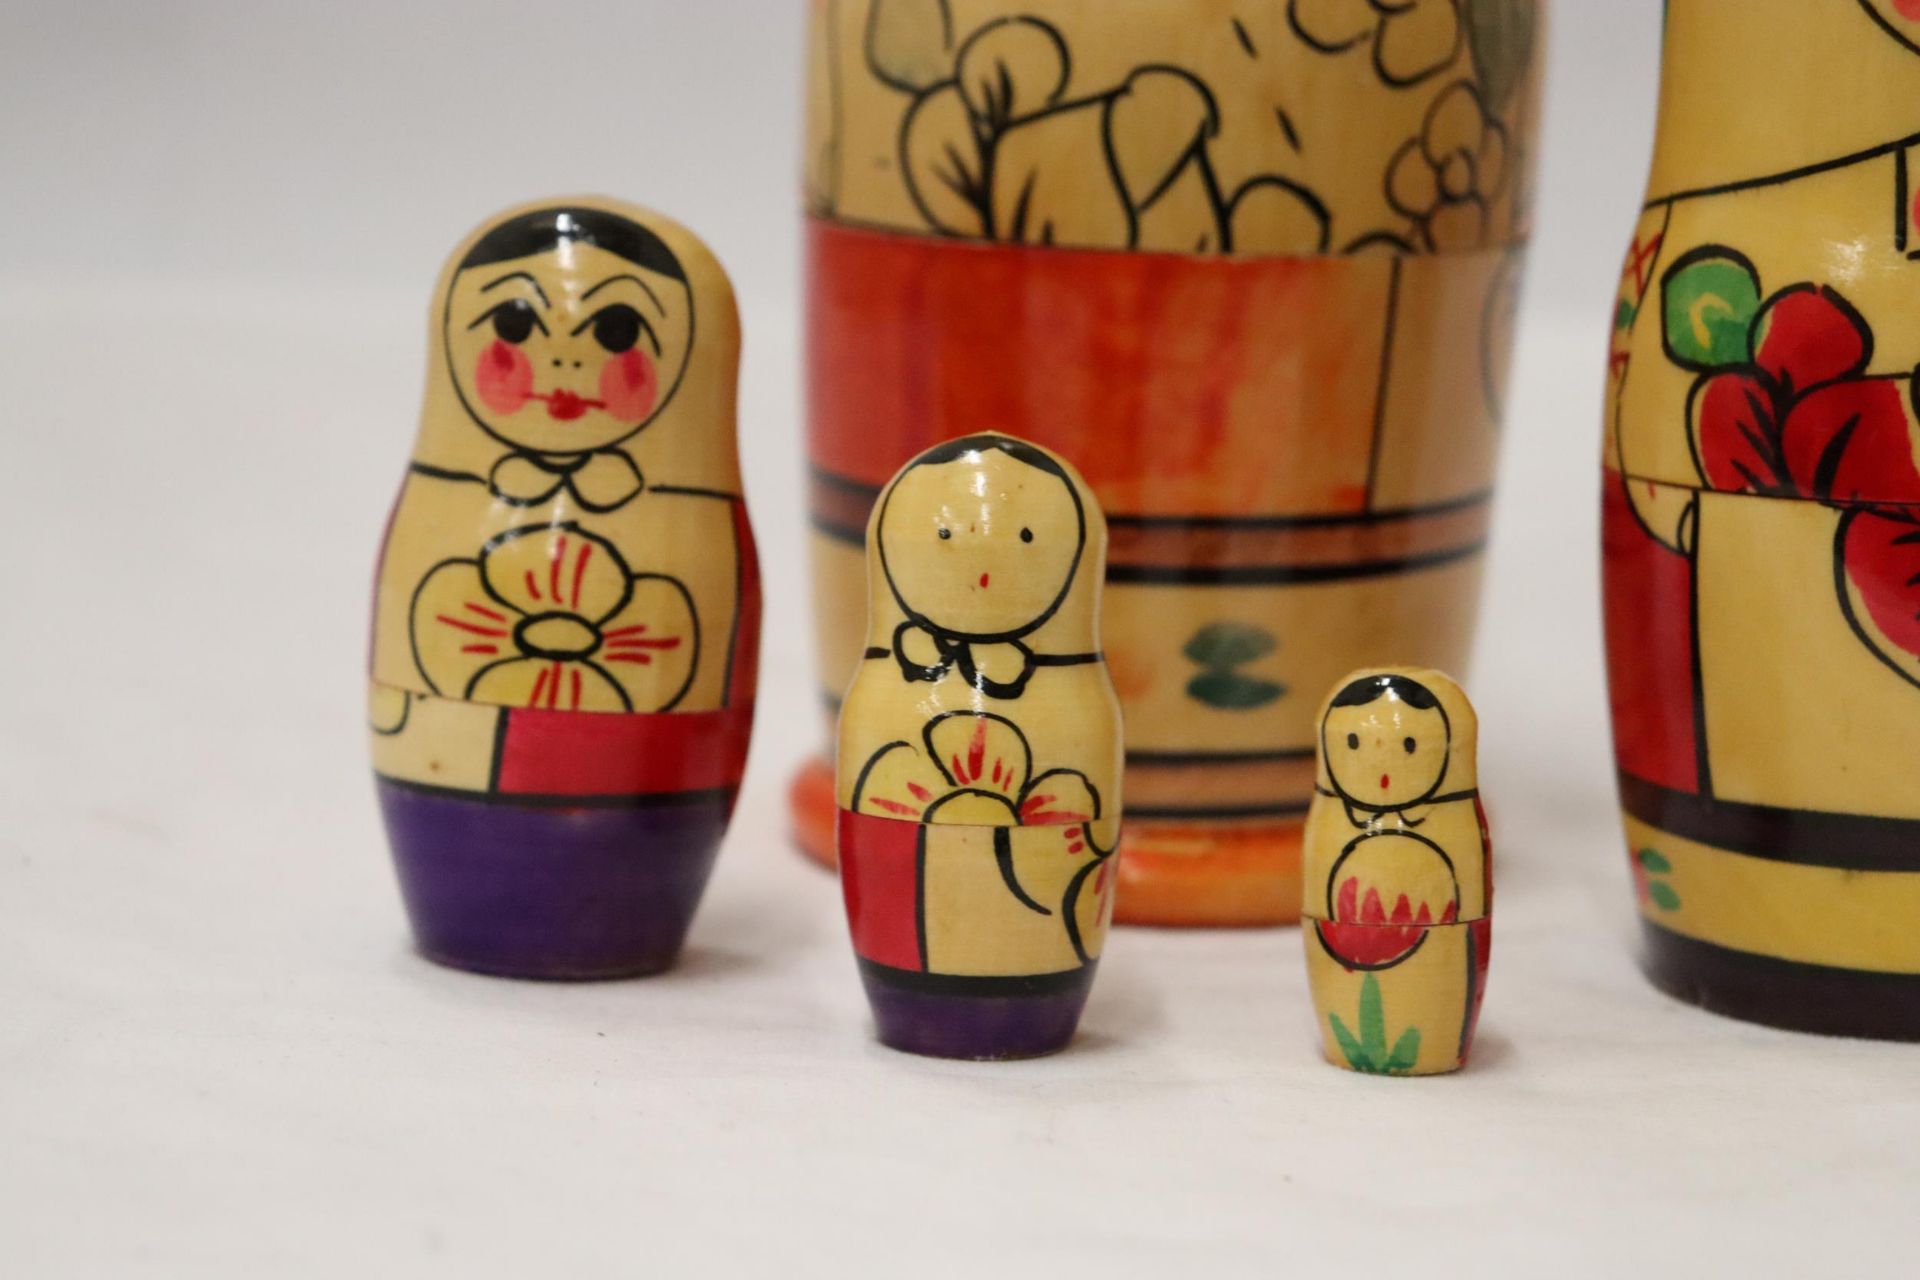 A LARGE RUSSIAN NESTING DOLL - Image 2 of 7